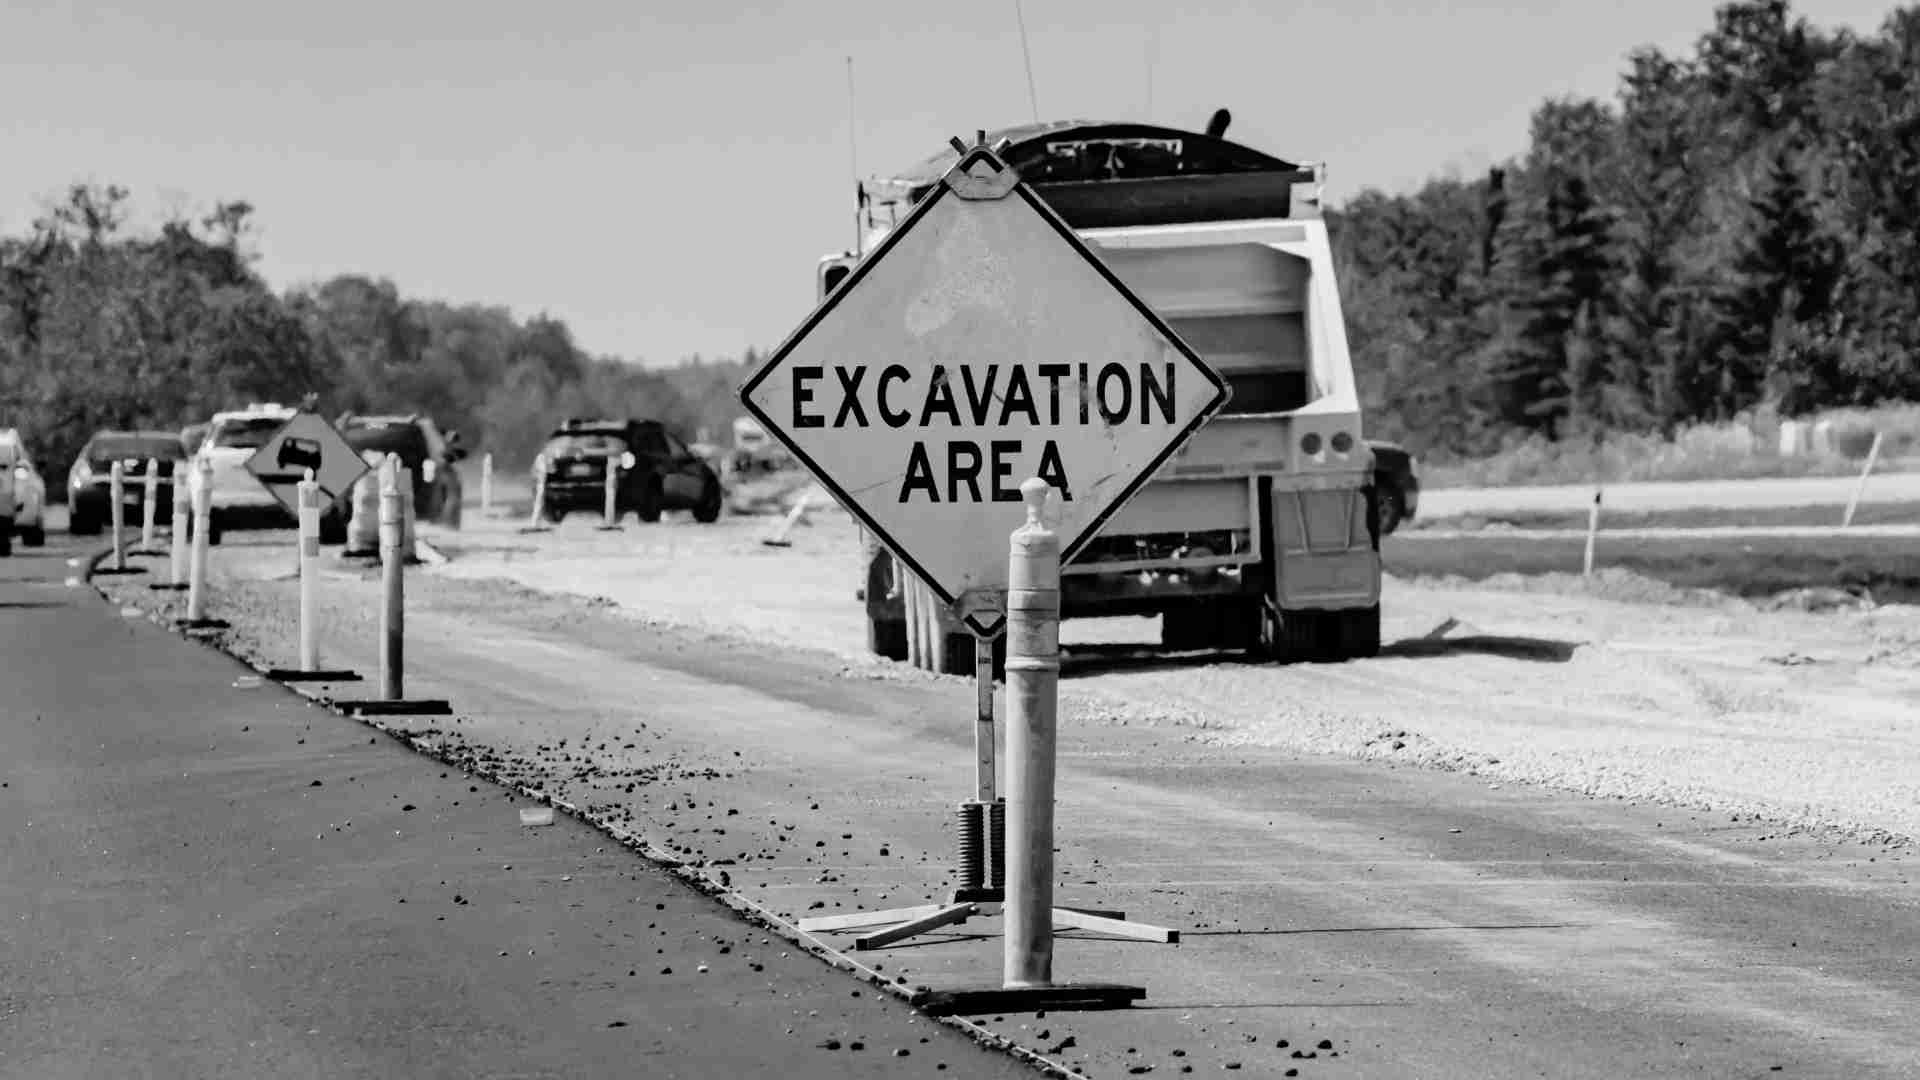 Black and white close up of an excavation area sign on a busy road